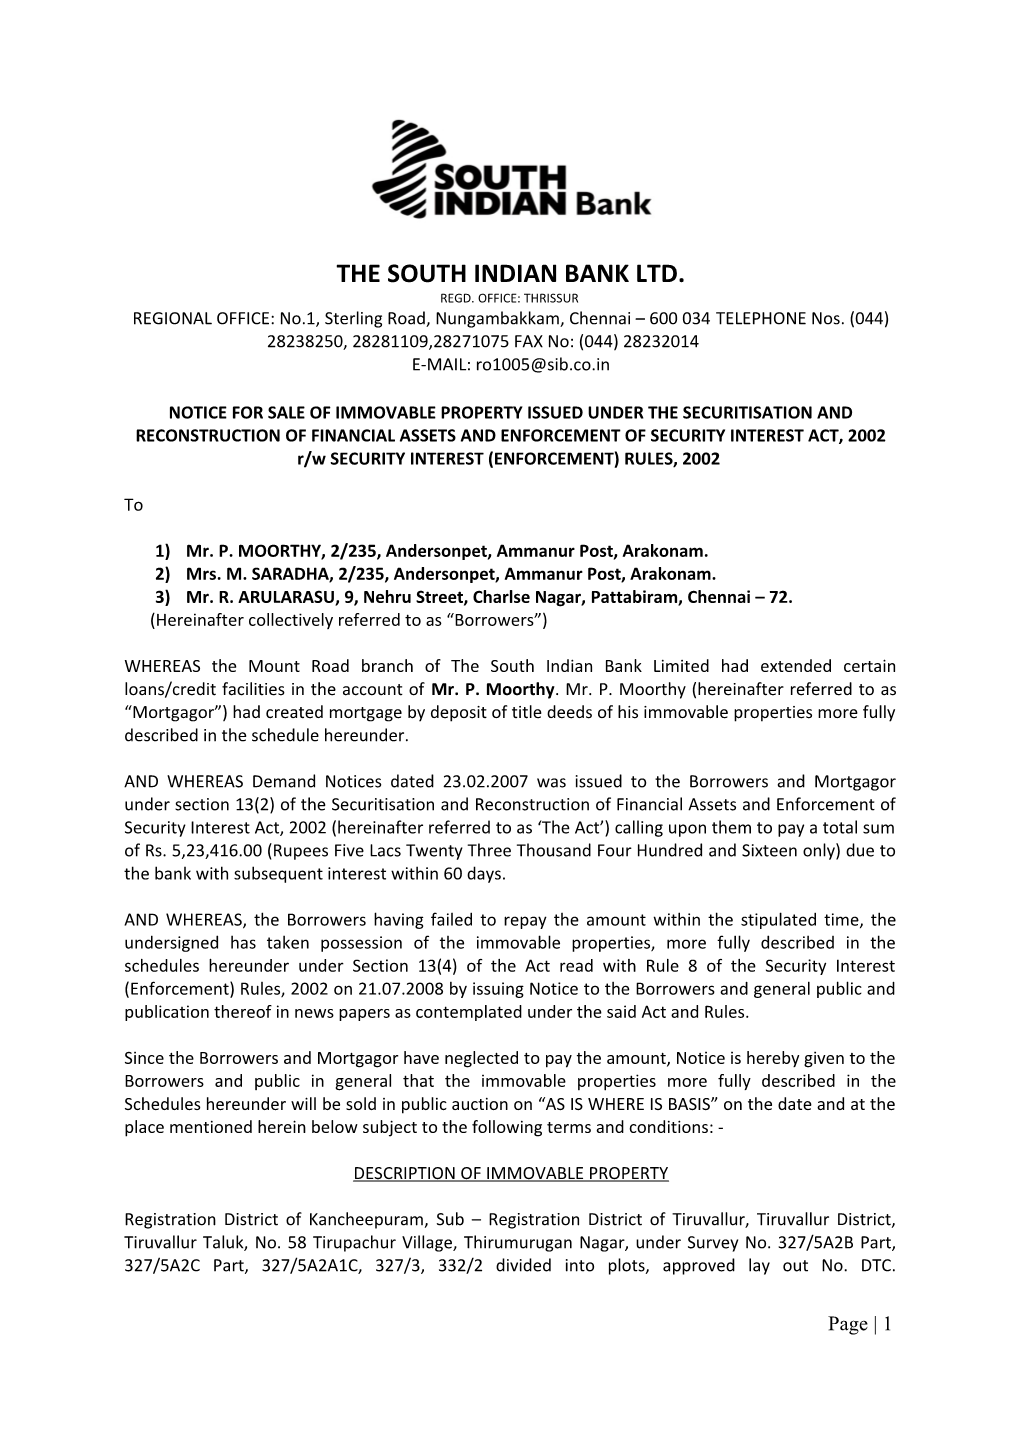 The South Indian Bank Ltd s1